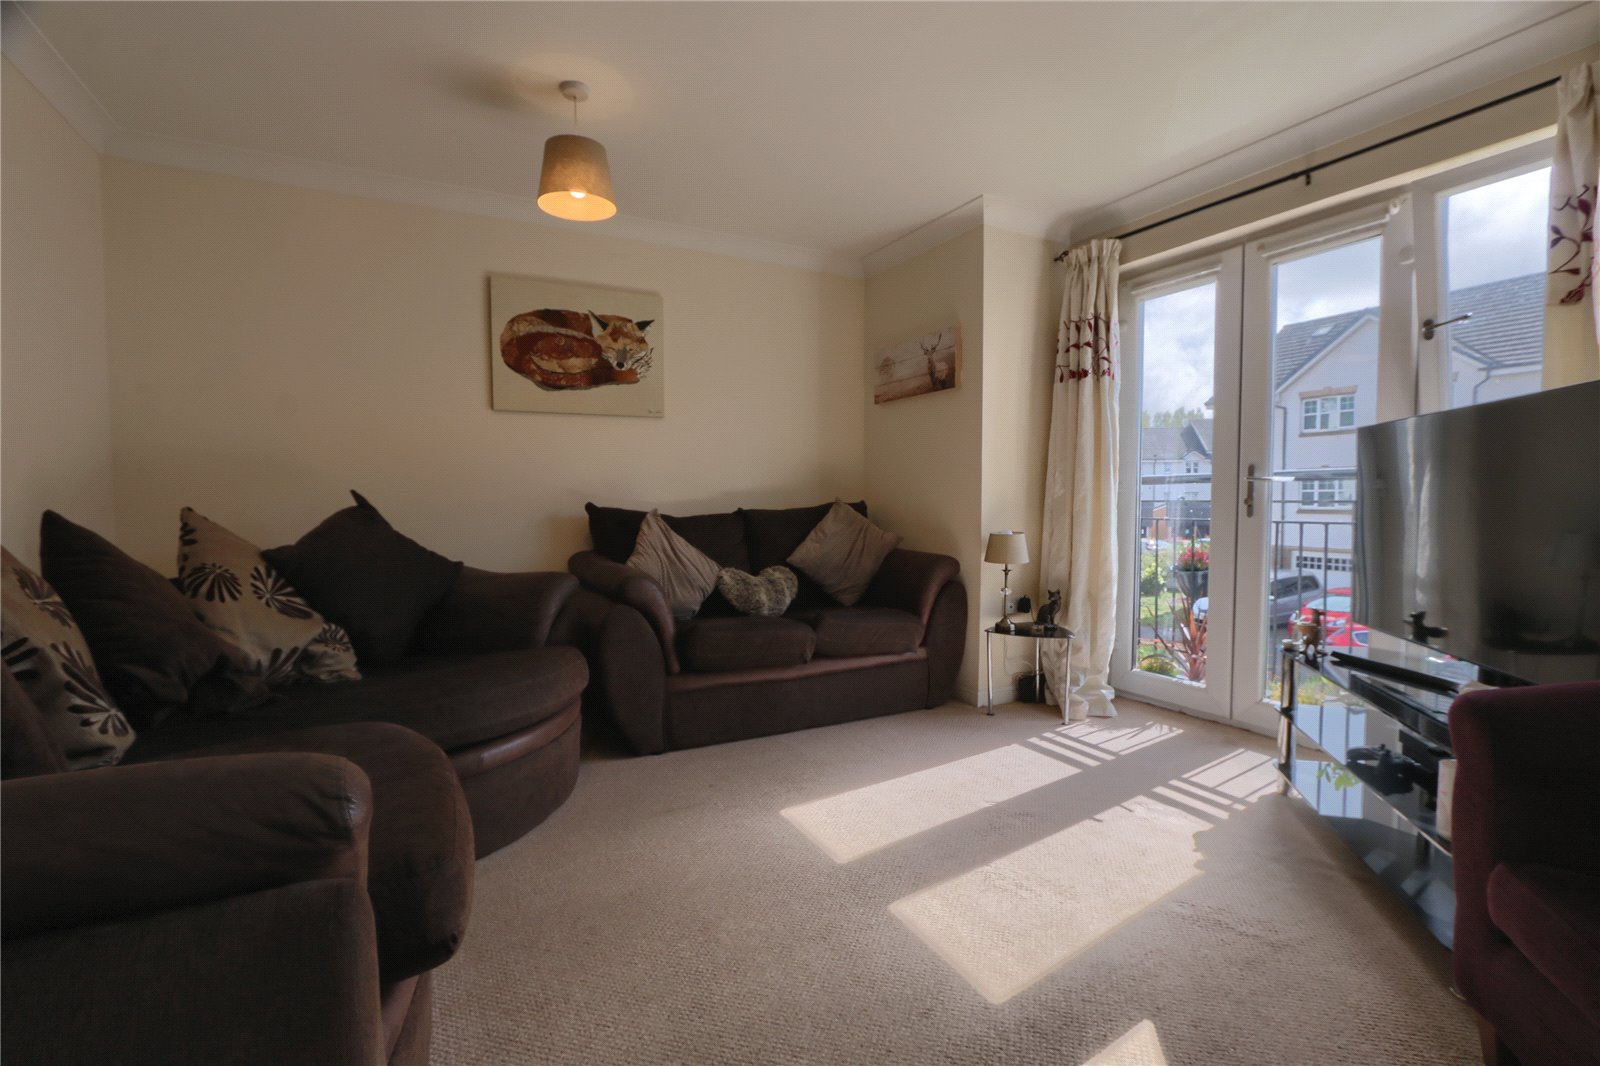 2 bed apartment to rent  - Property Image 1